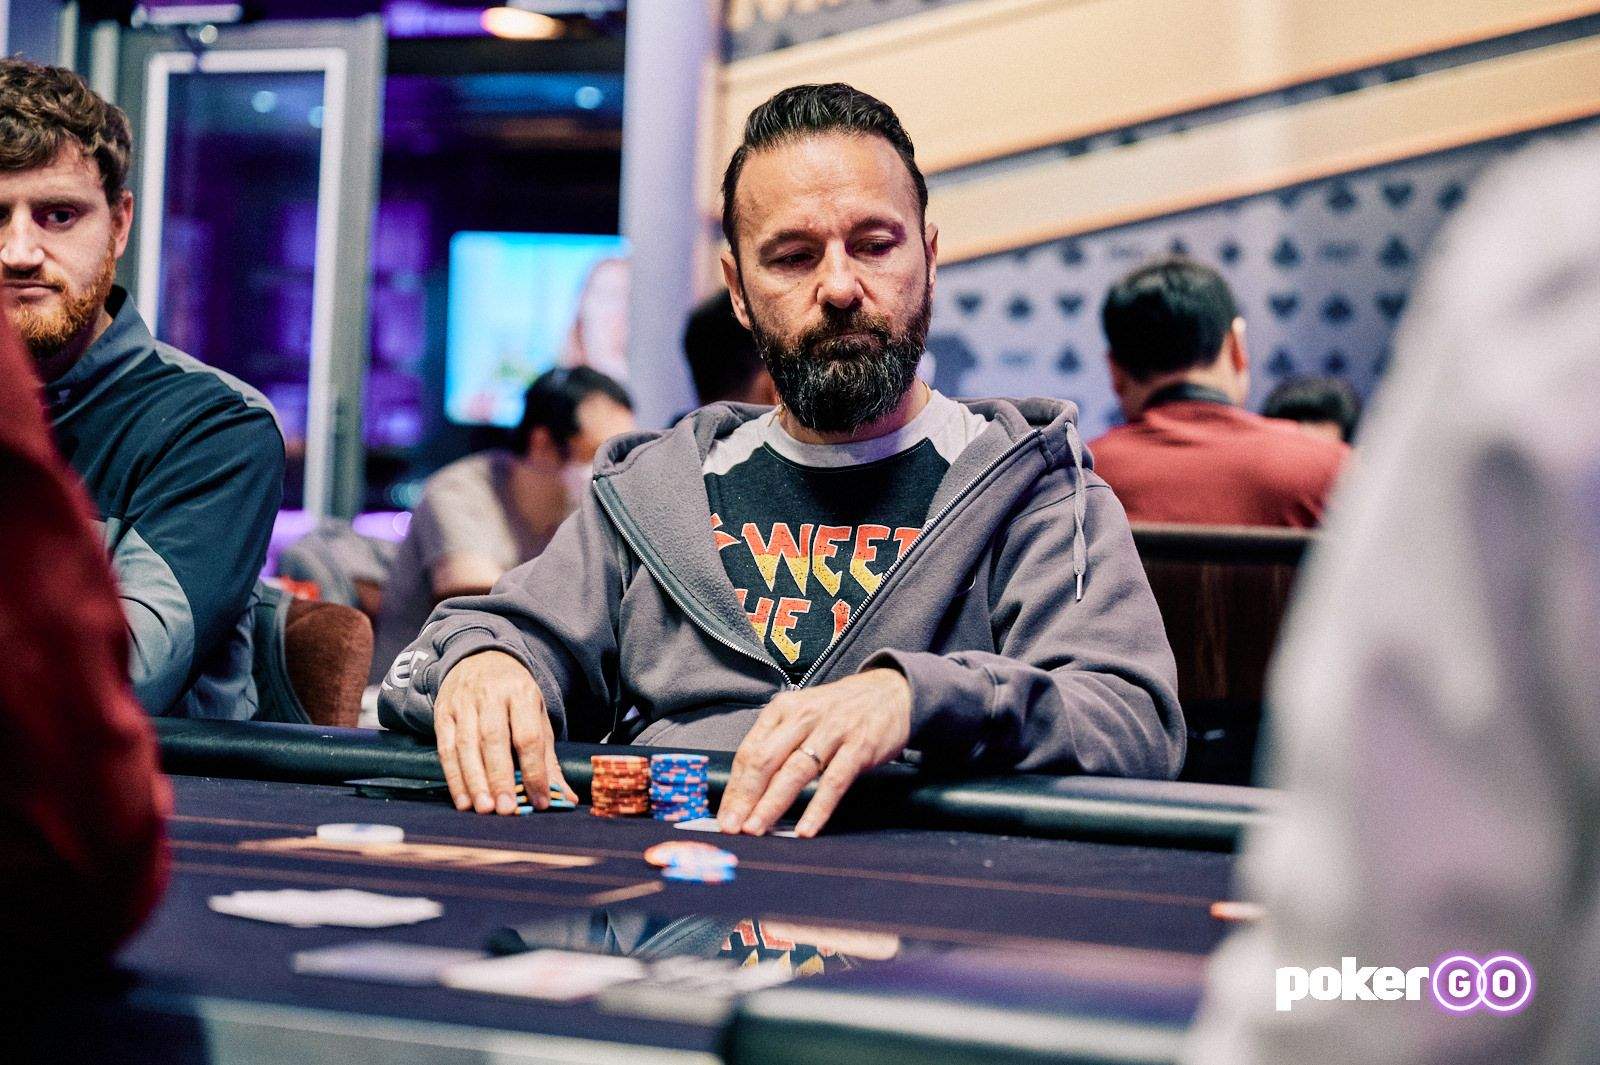 Peters, Negreanu Lead PokerGO Cup Event #7 Final Table